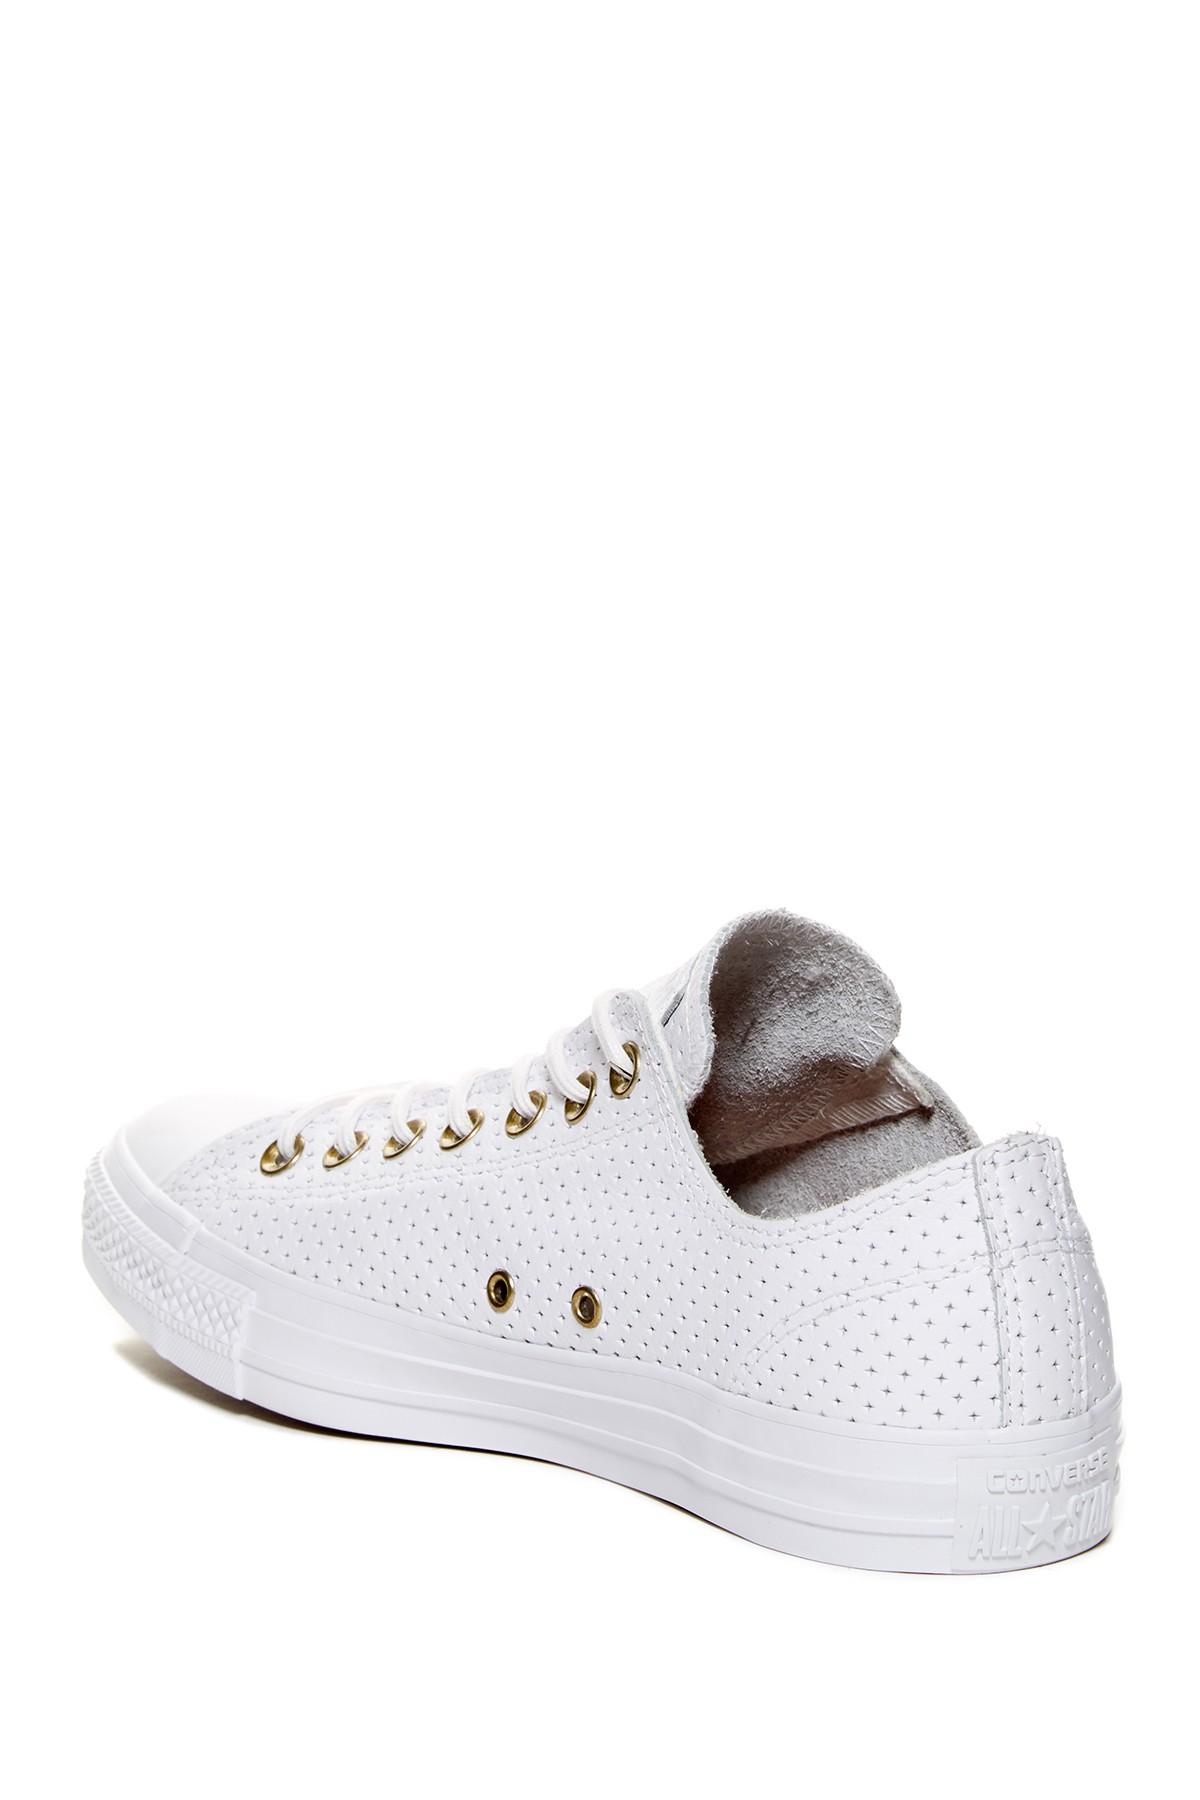 Perforated Leather Oxford Low Top 